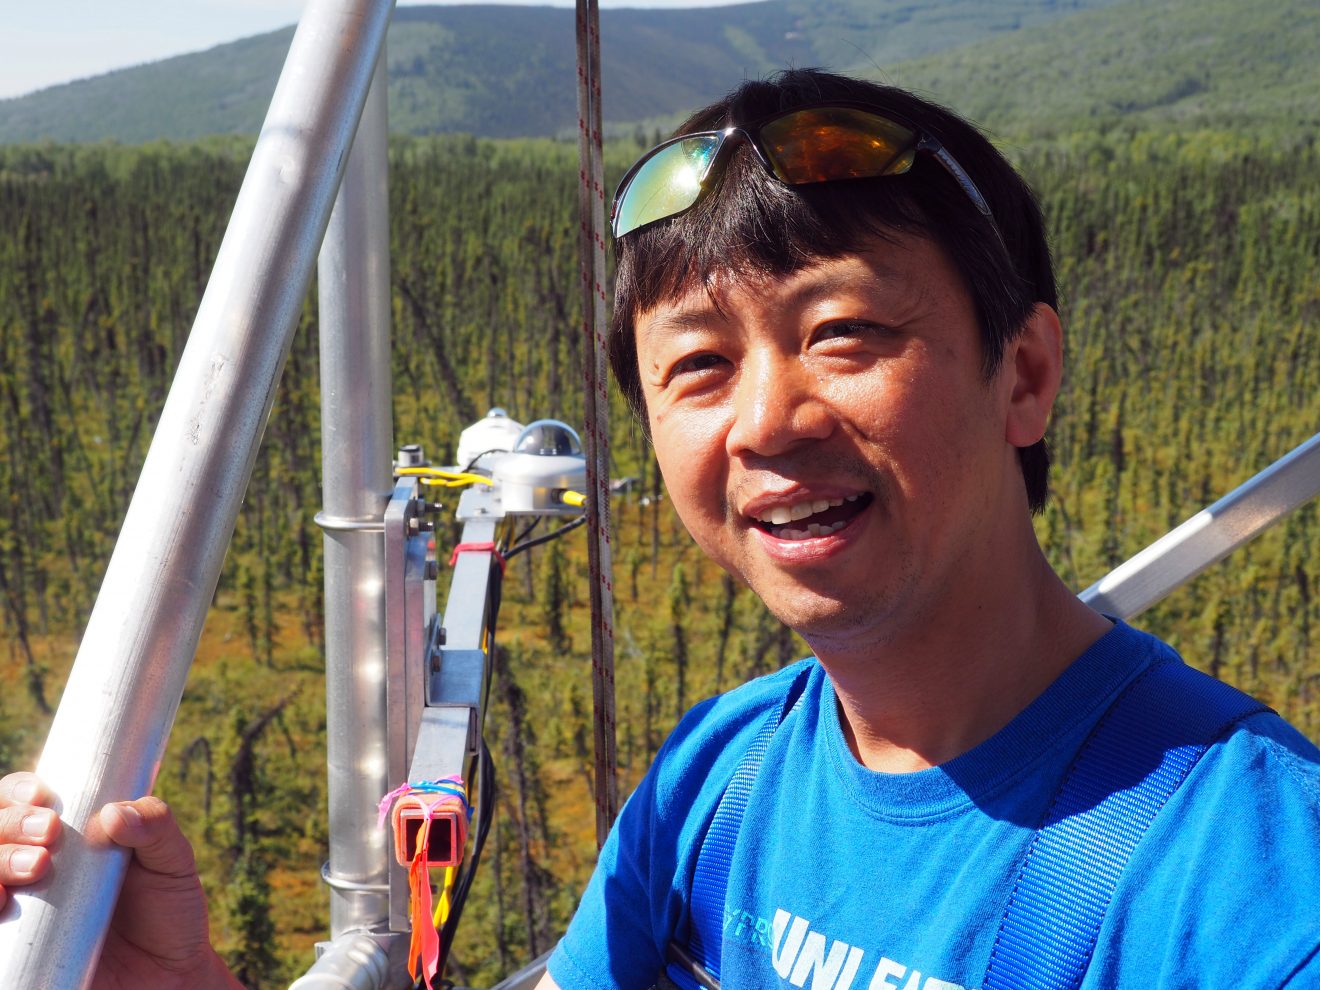 Heather McFarland photoHideki Kobayashi gathers information at Poker Flat Research Range to validate satellite data. Instruments from a 17-meter tower measure the carbon absorbed by the black spruce forest there.